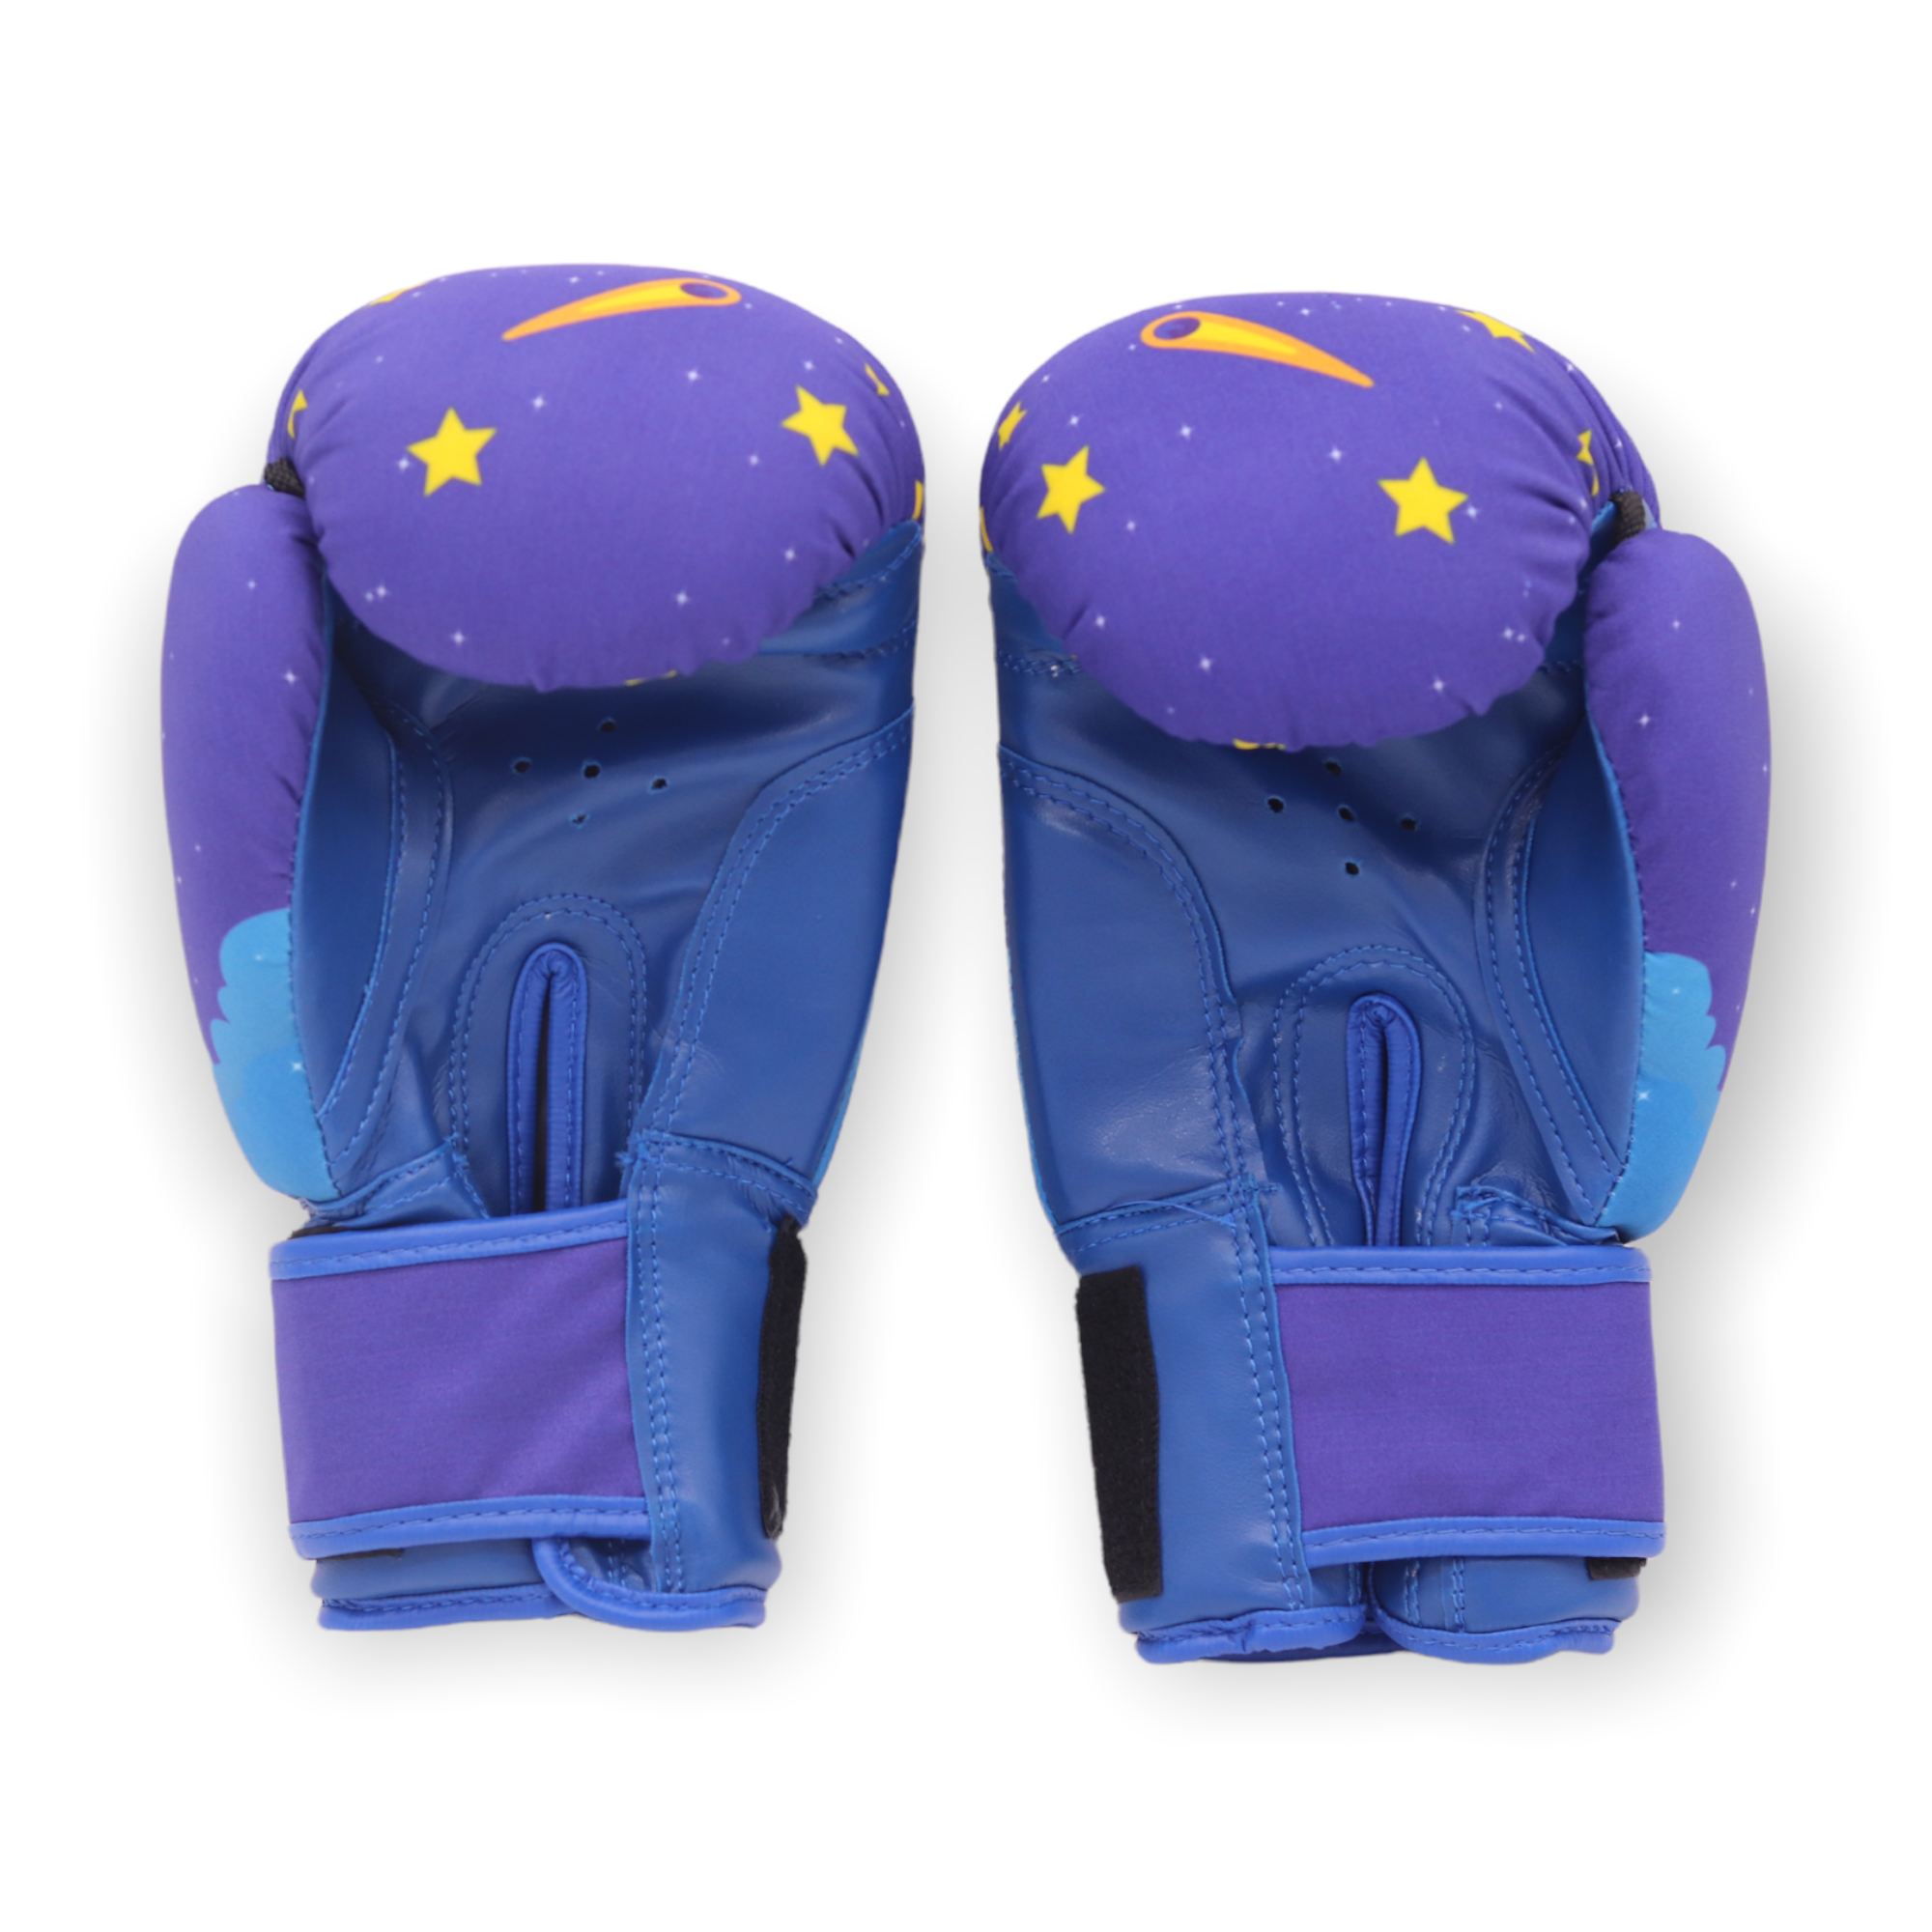 ASTRO Boxing Gloves